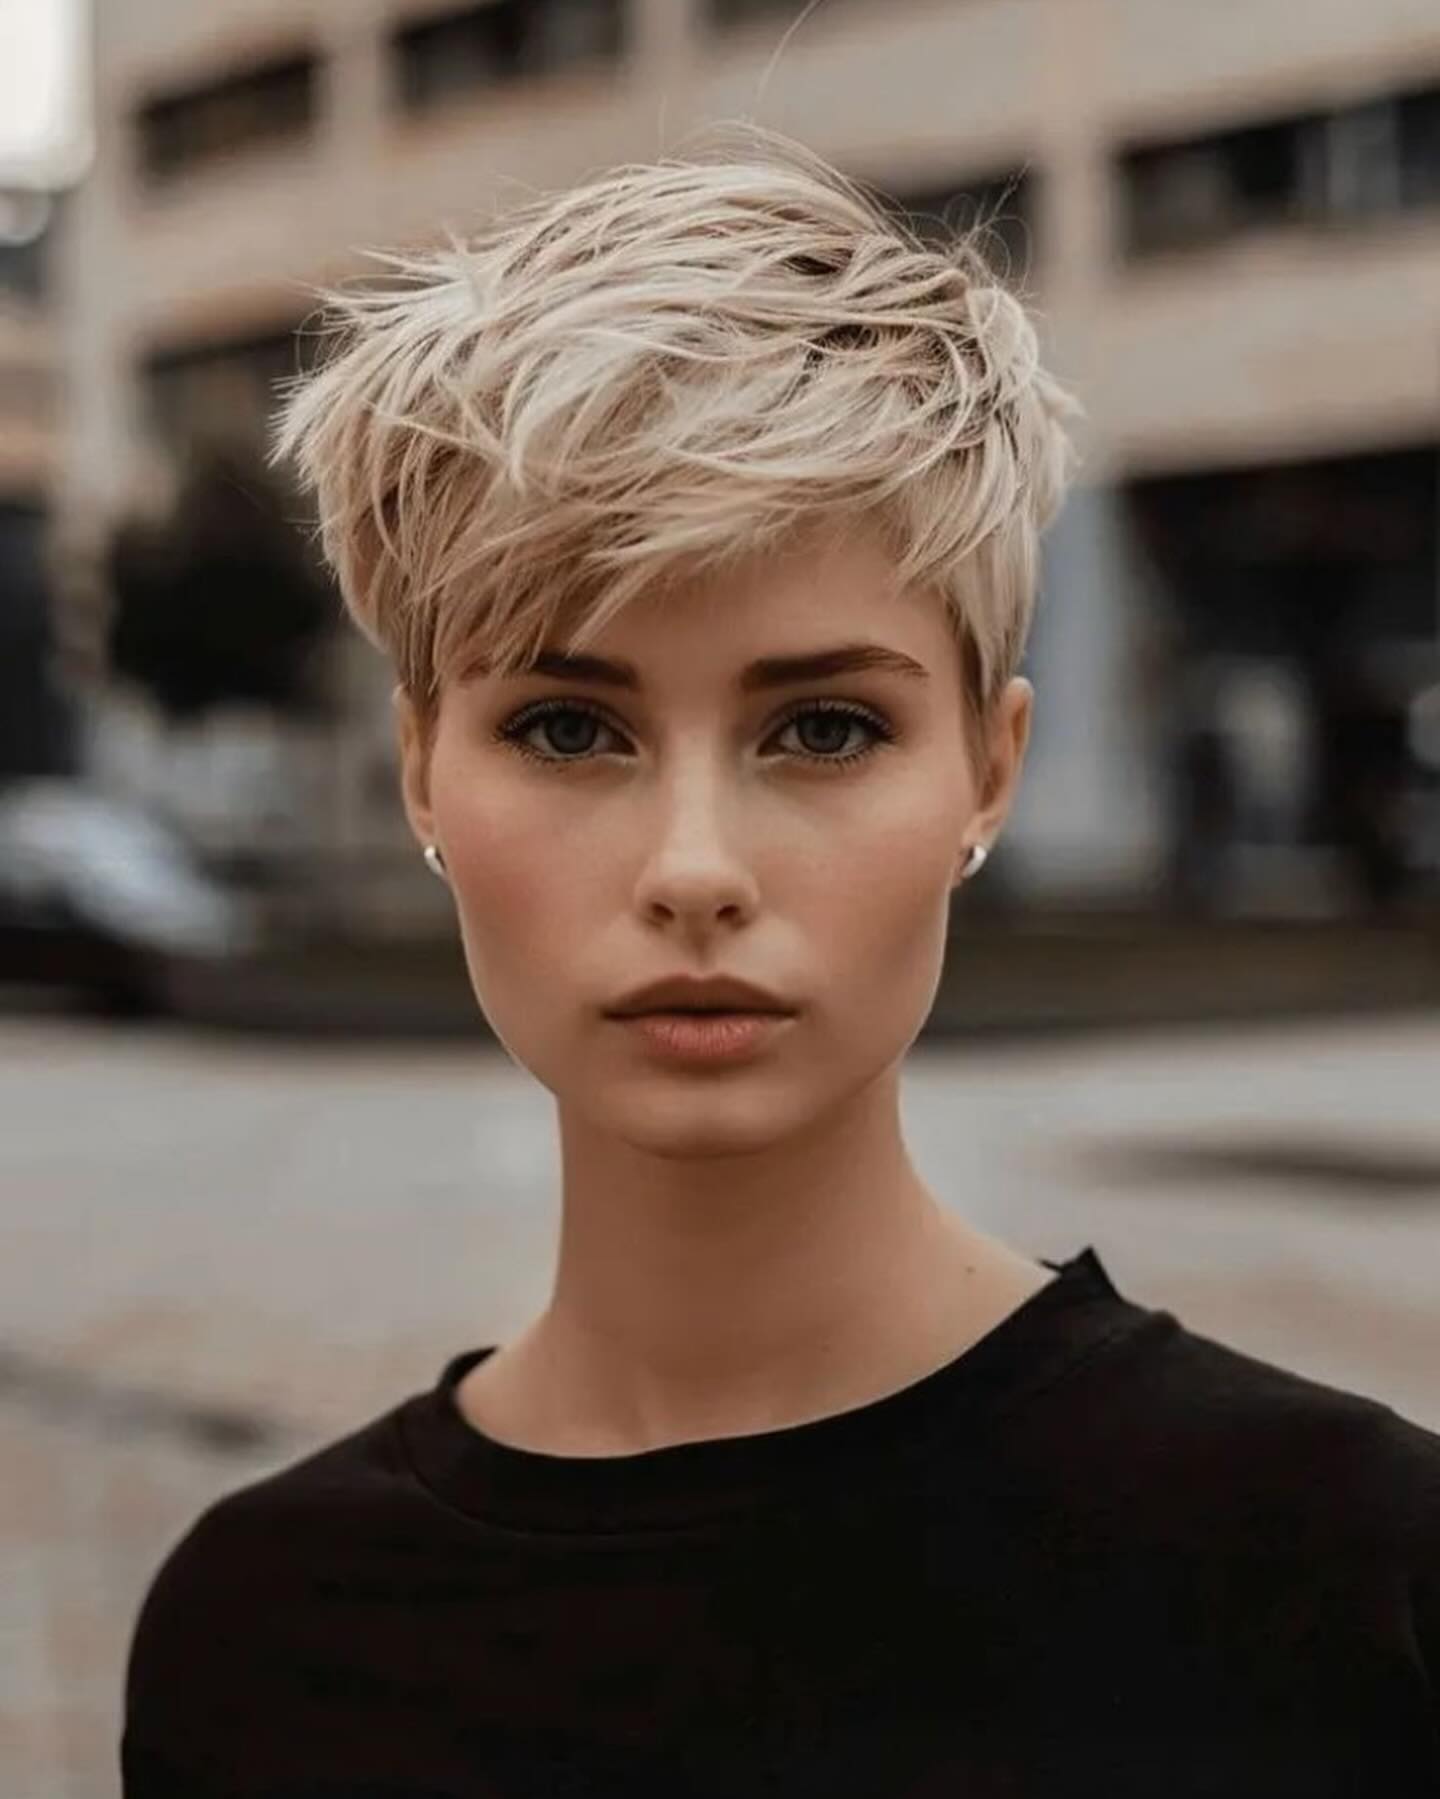 22. Chic Textured Long Pixie Cut - Long Pixie Cut for Trendy Hairstyle